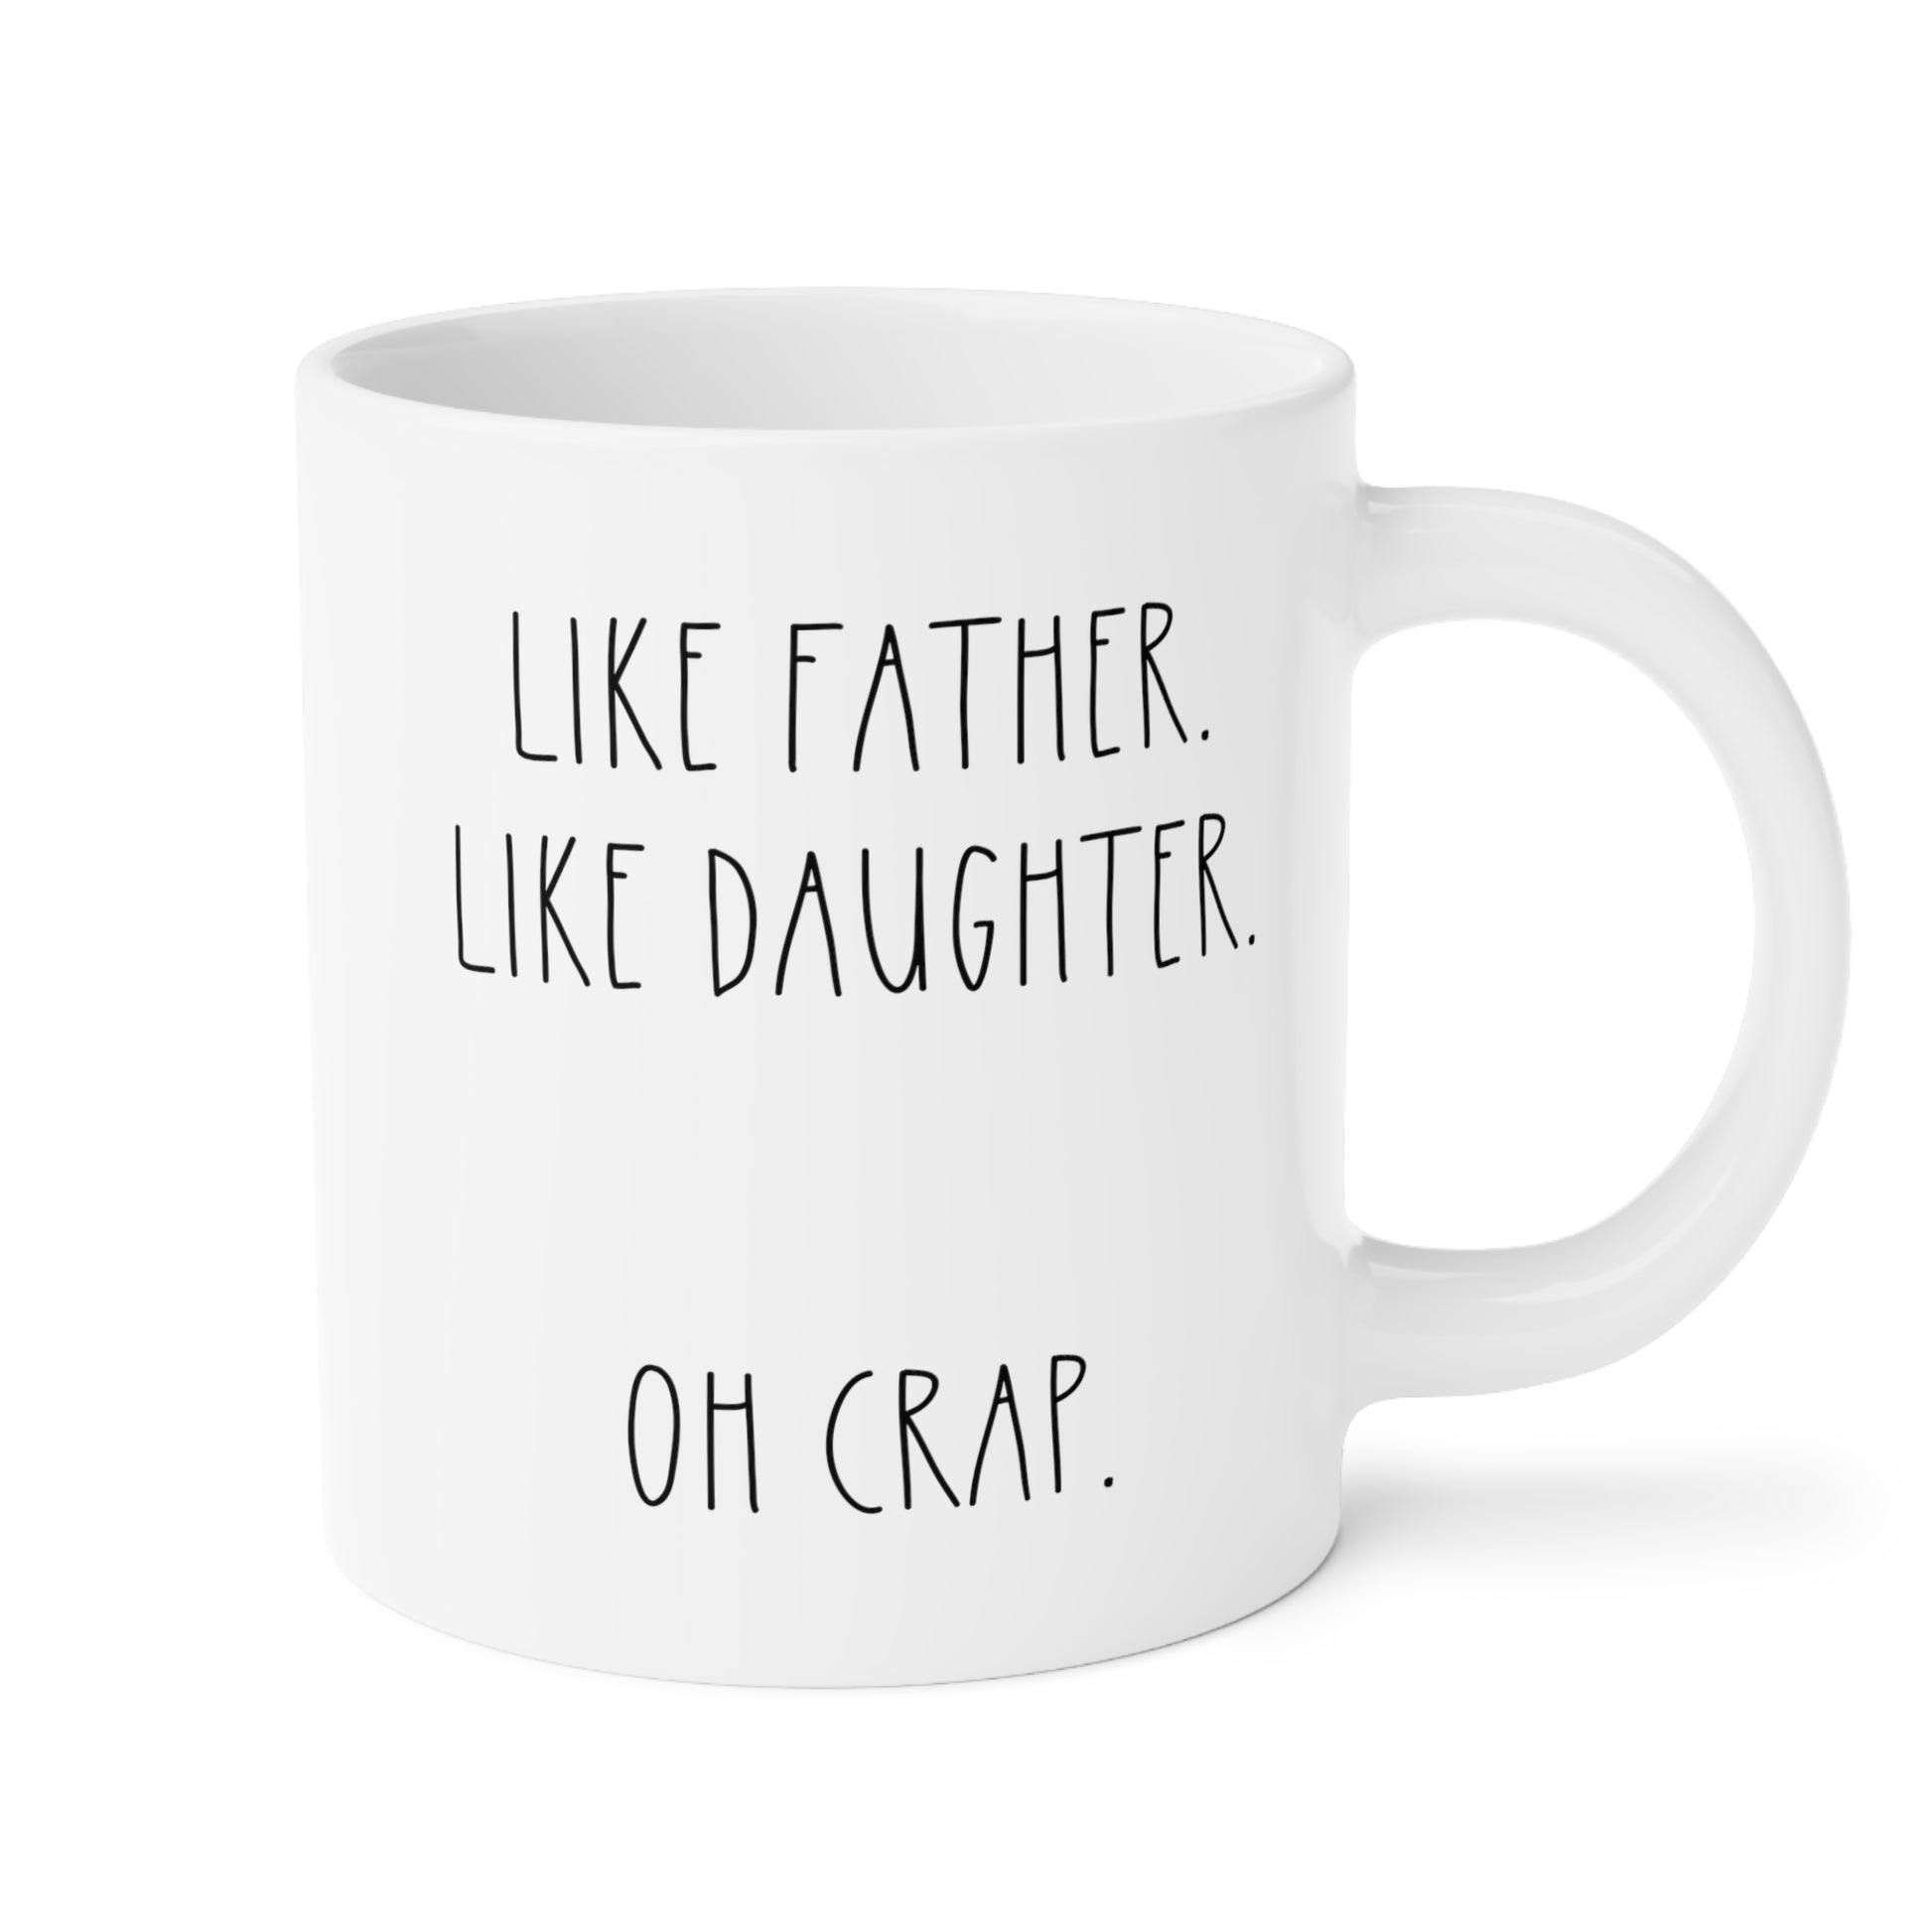 Like Father Like Daughter Oh Crap 20oz white funny large coffee mug gift for dad fathers day christmas birthday waveywares wavey wares wavywares wavy wares